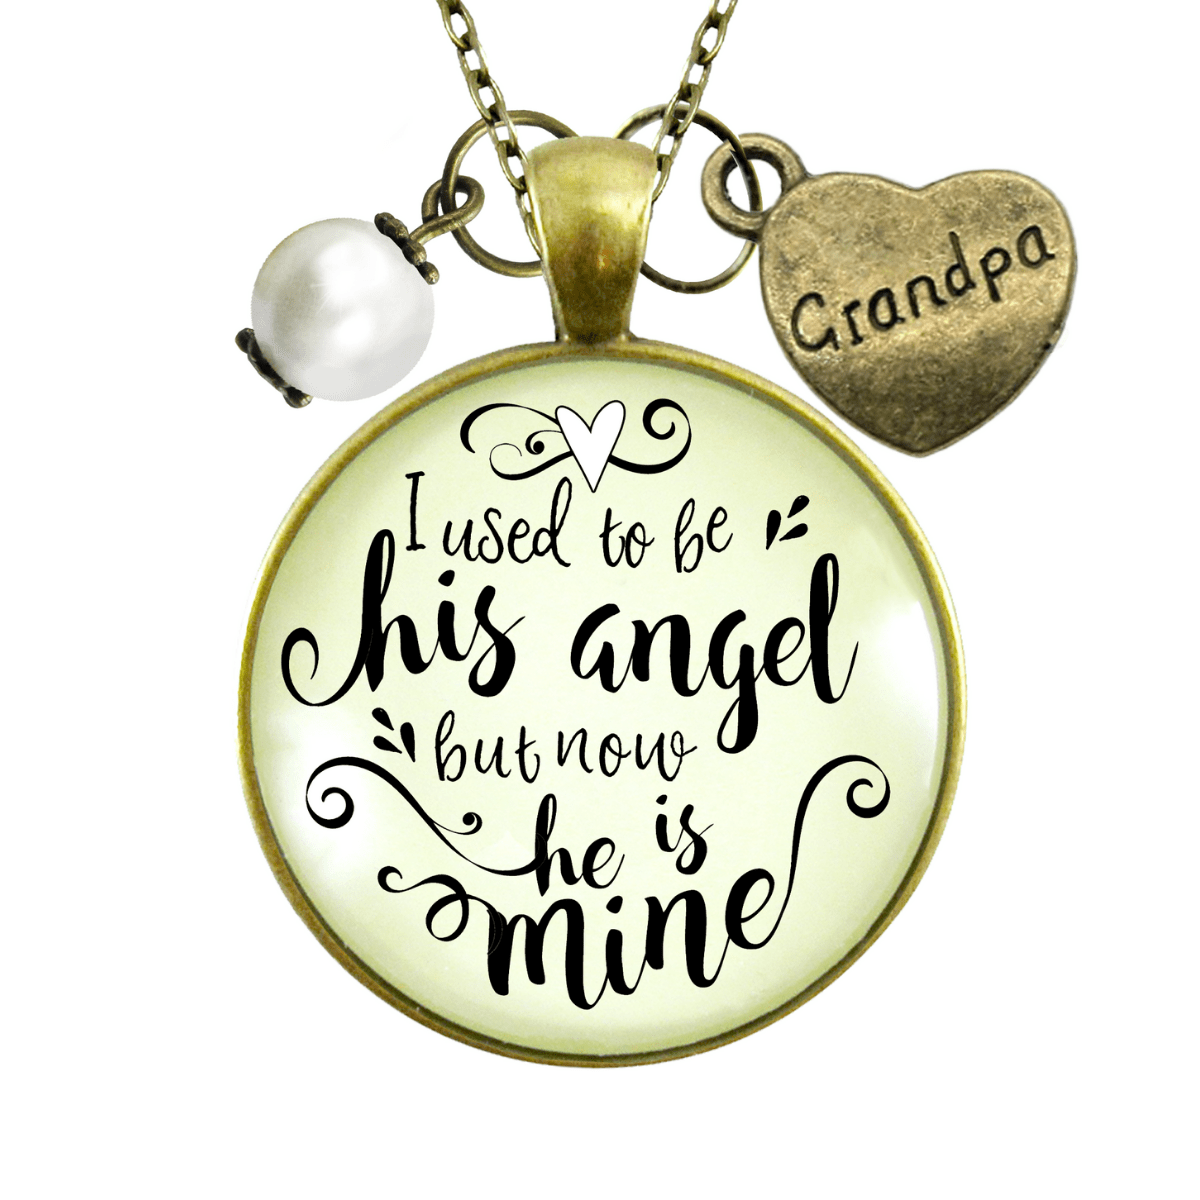 Gutsy Goodness Grandma Memorial Necklace I Used to Be Her Angel Now She's Mine Sympathy Gift - Gutsy Goodness;Grandma Memorial Necklace I Used To Be Her Angel Now She's Mine Sympathy Gift - Gutsy Goodness Handmade Jewelry Gifts